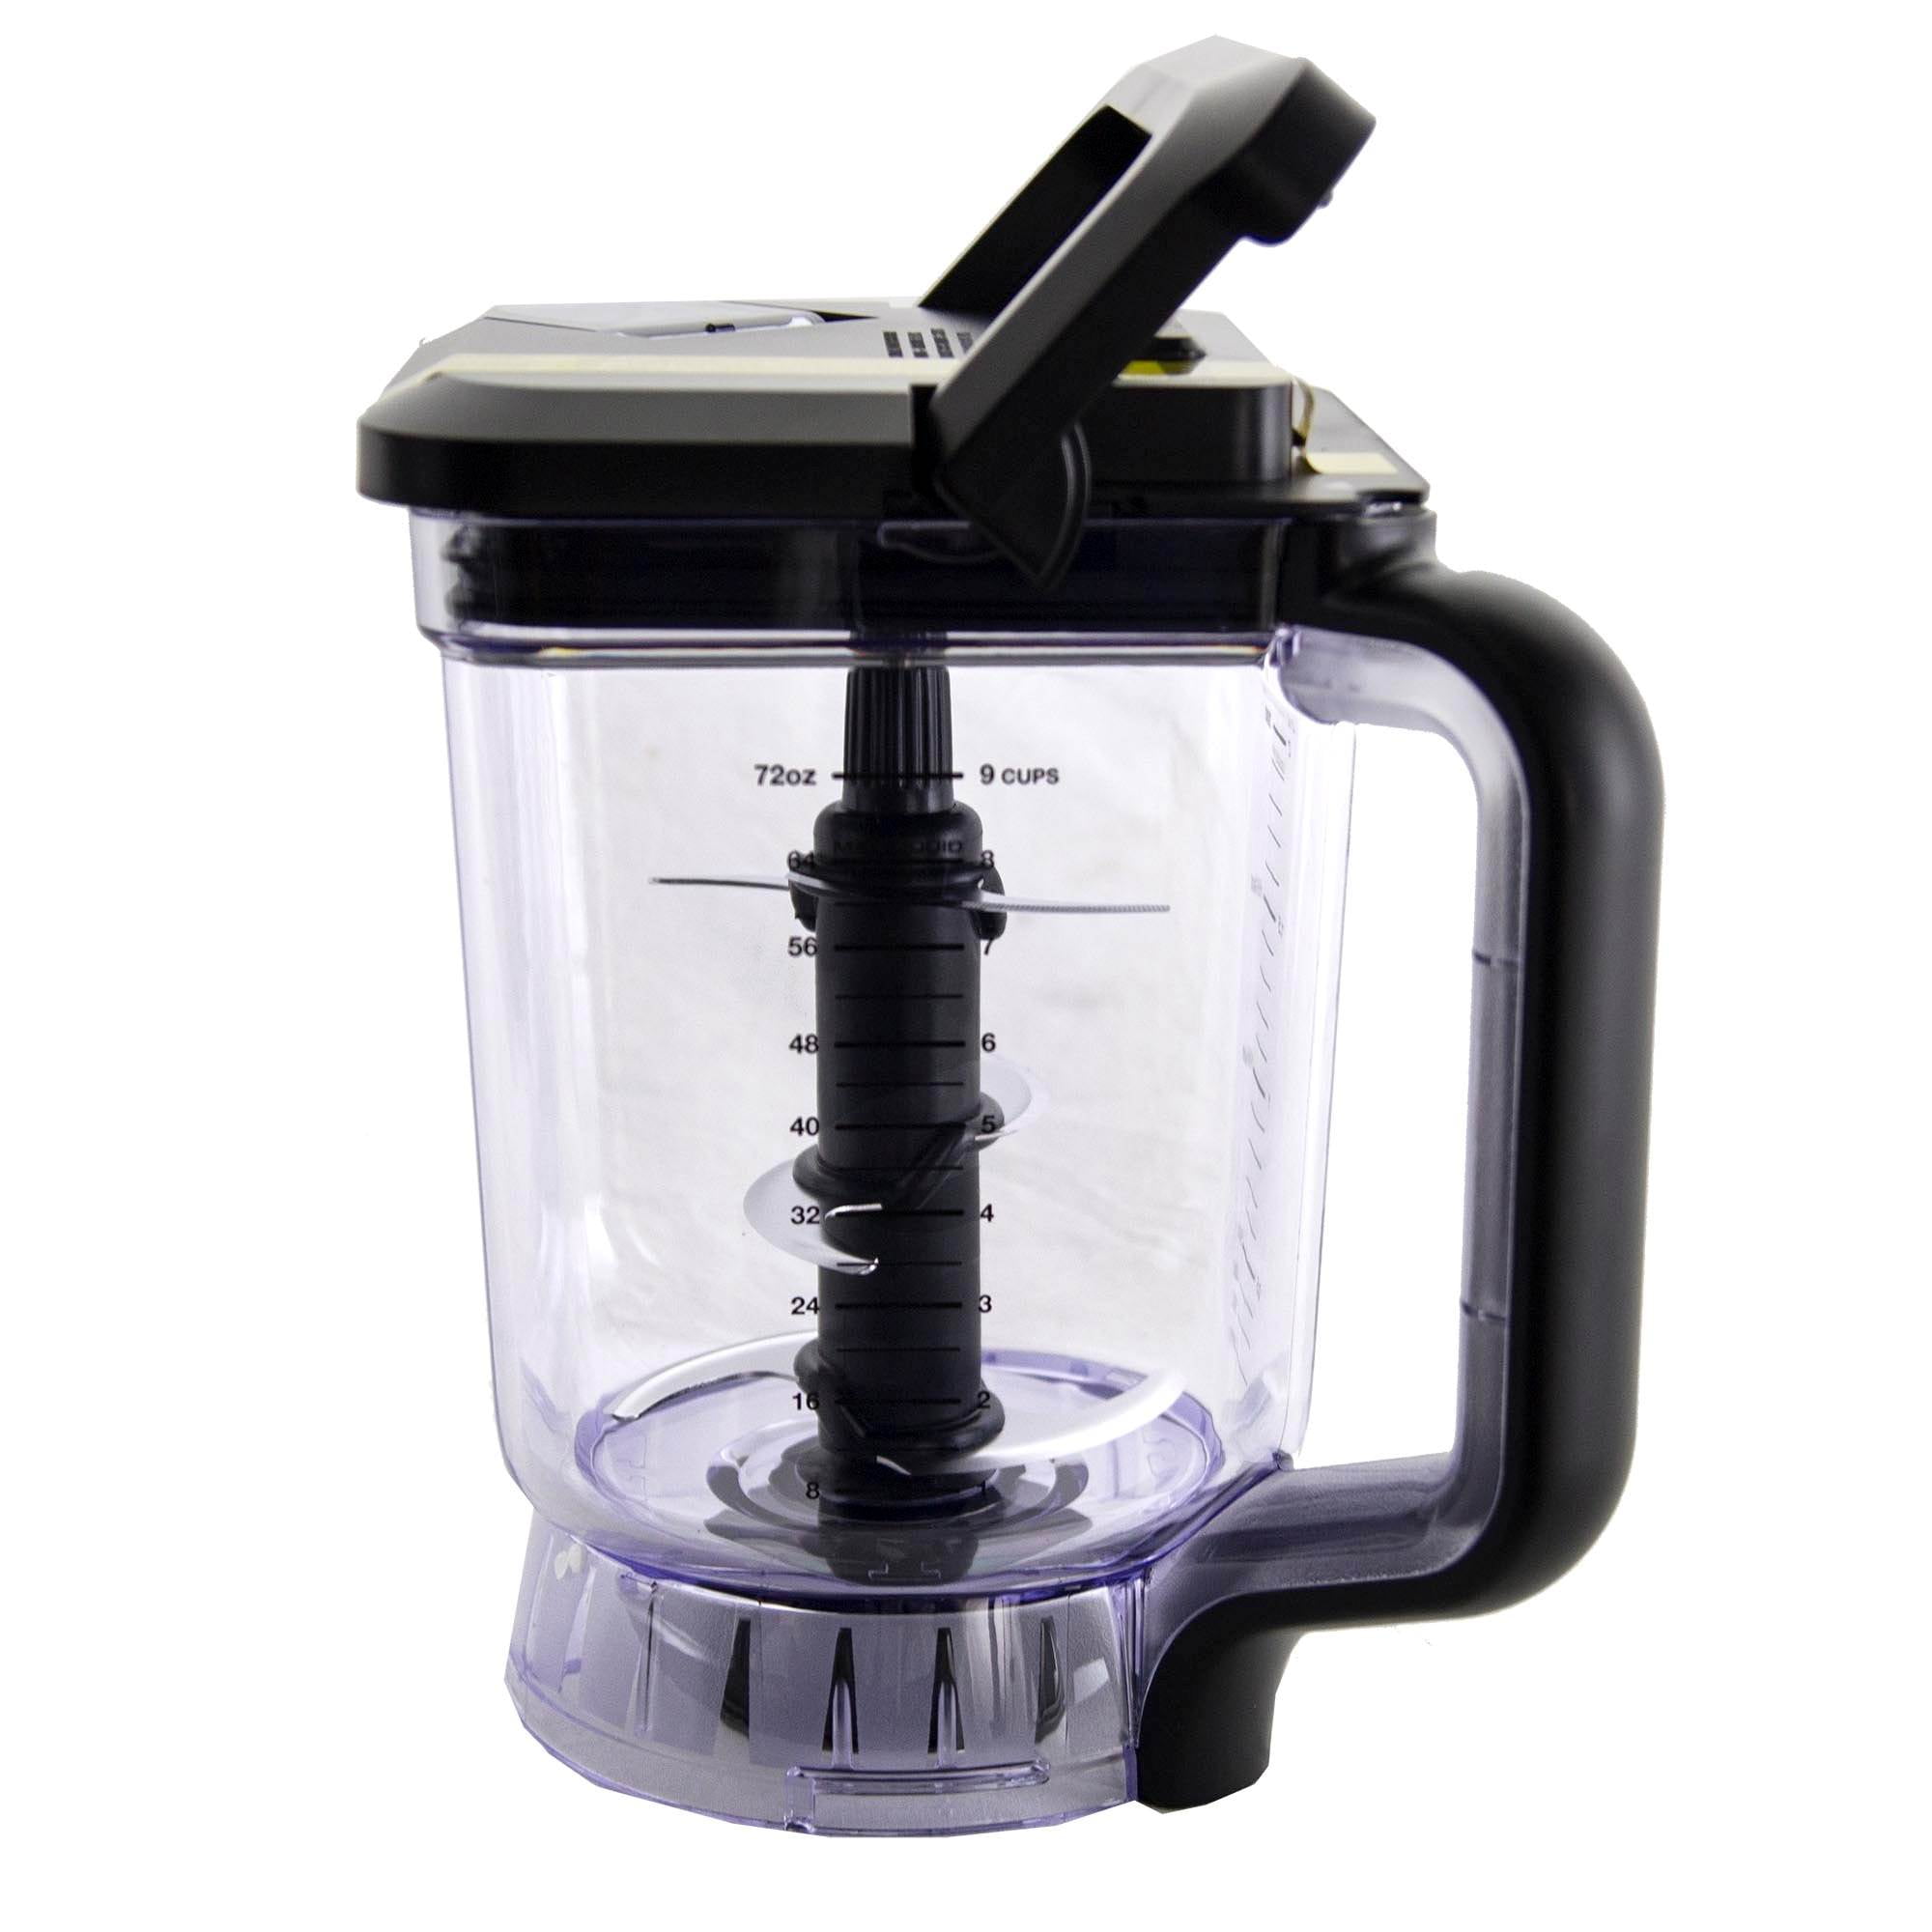 Ninja Blender 72 oz 9 Cup Pitcher Lid & Blade Replacement for Sale